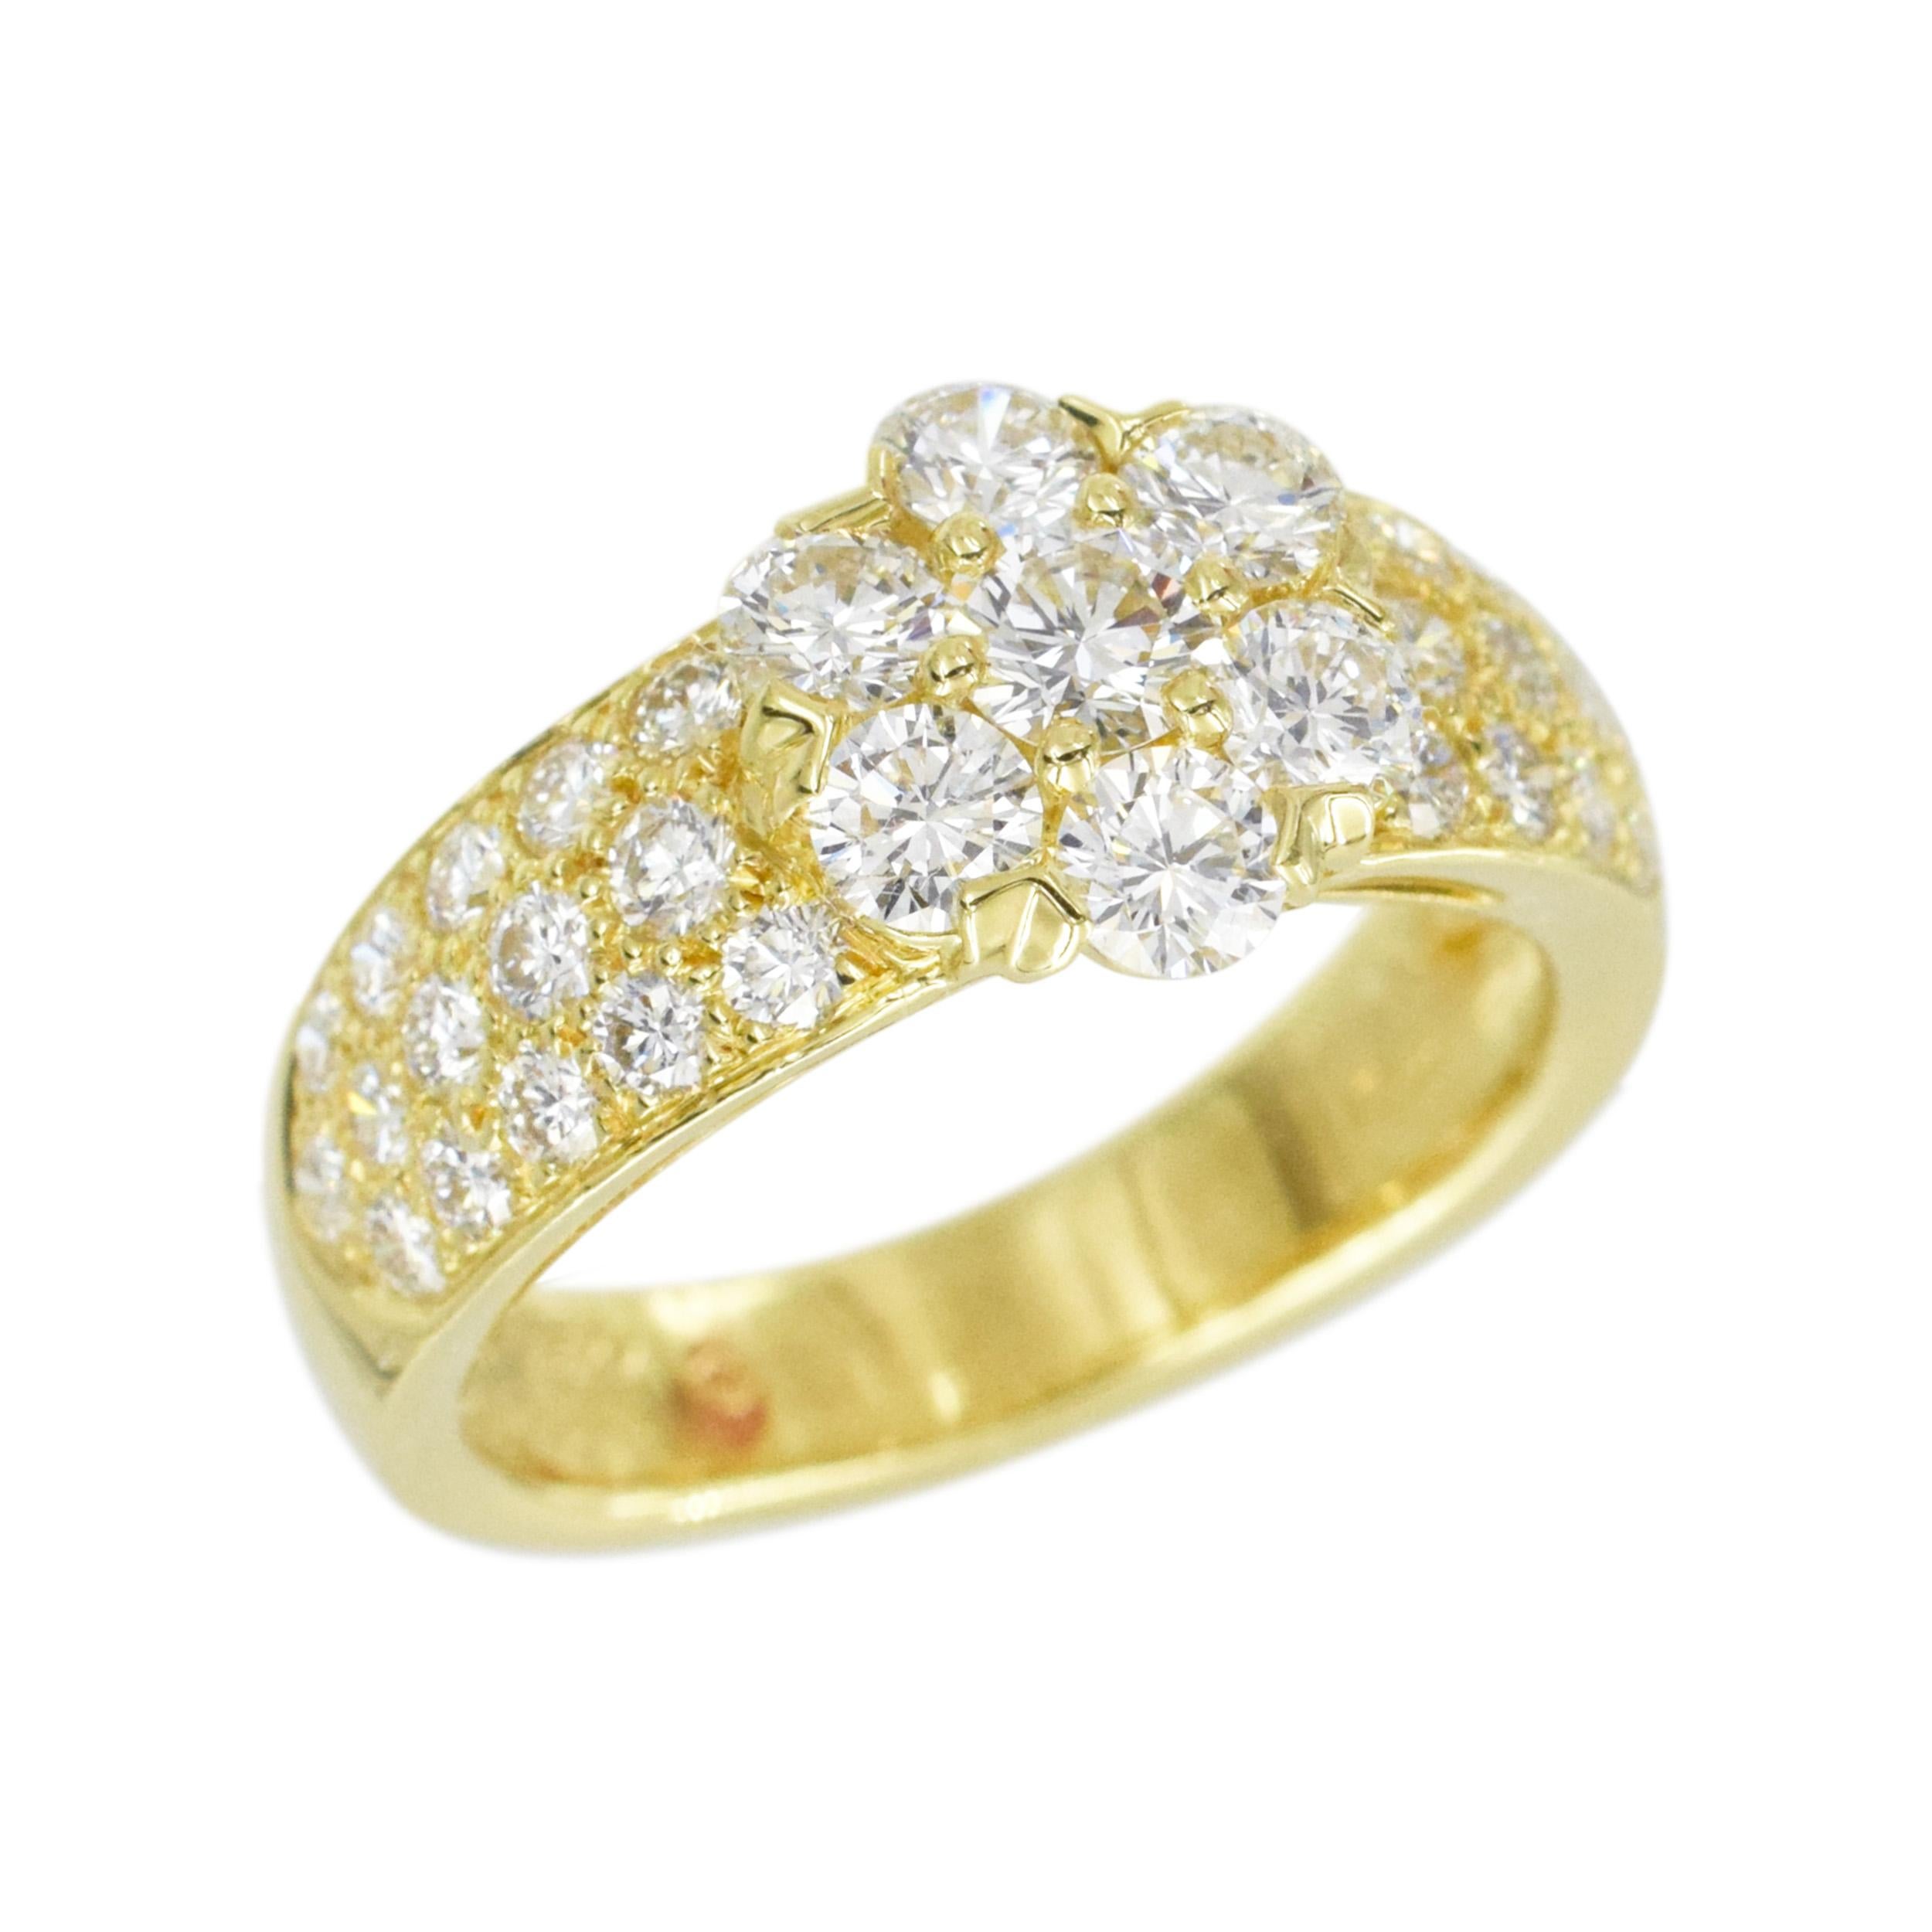 Van Cleef & Arpels diamond fleurette ring in 18k yellow gold. The ring features a
flower in the center, composed of 7 round brilliant cut diamonds, accented with shank half way pave set with 3 rows of round brilliant cut diamonds. There is of 37